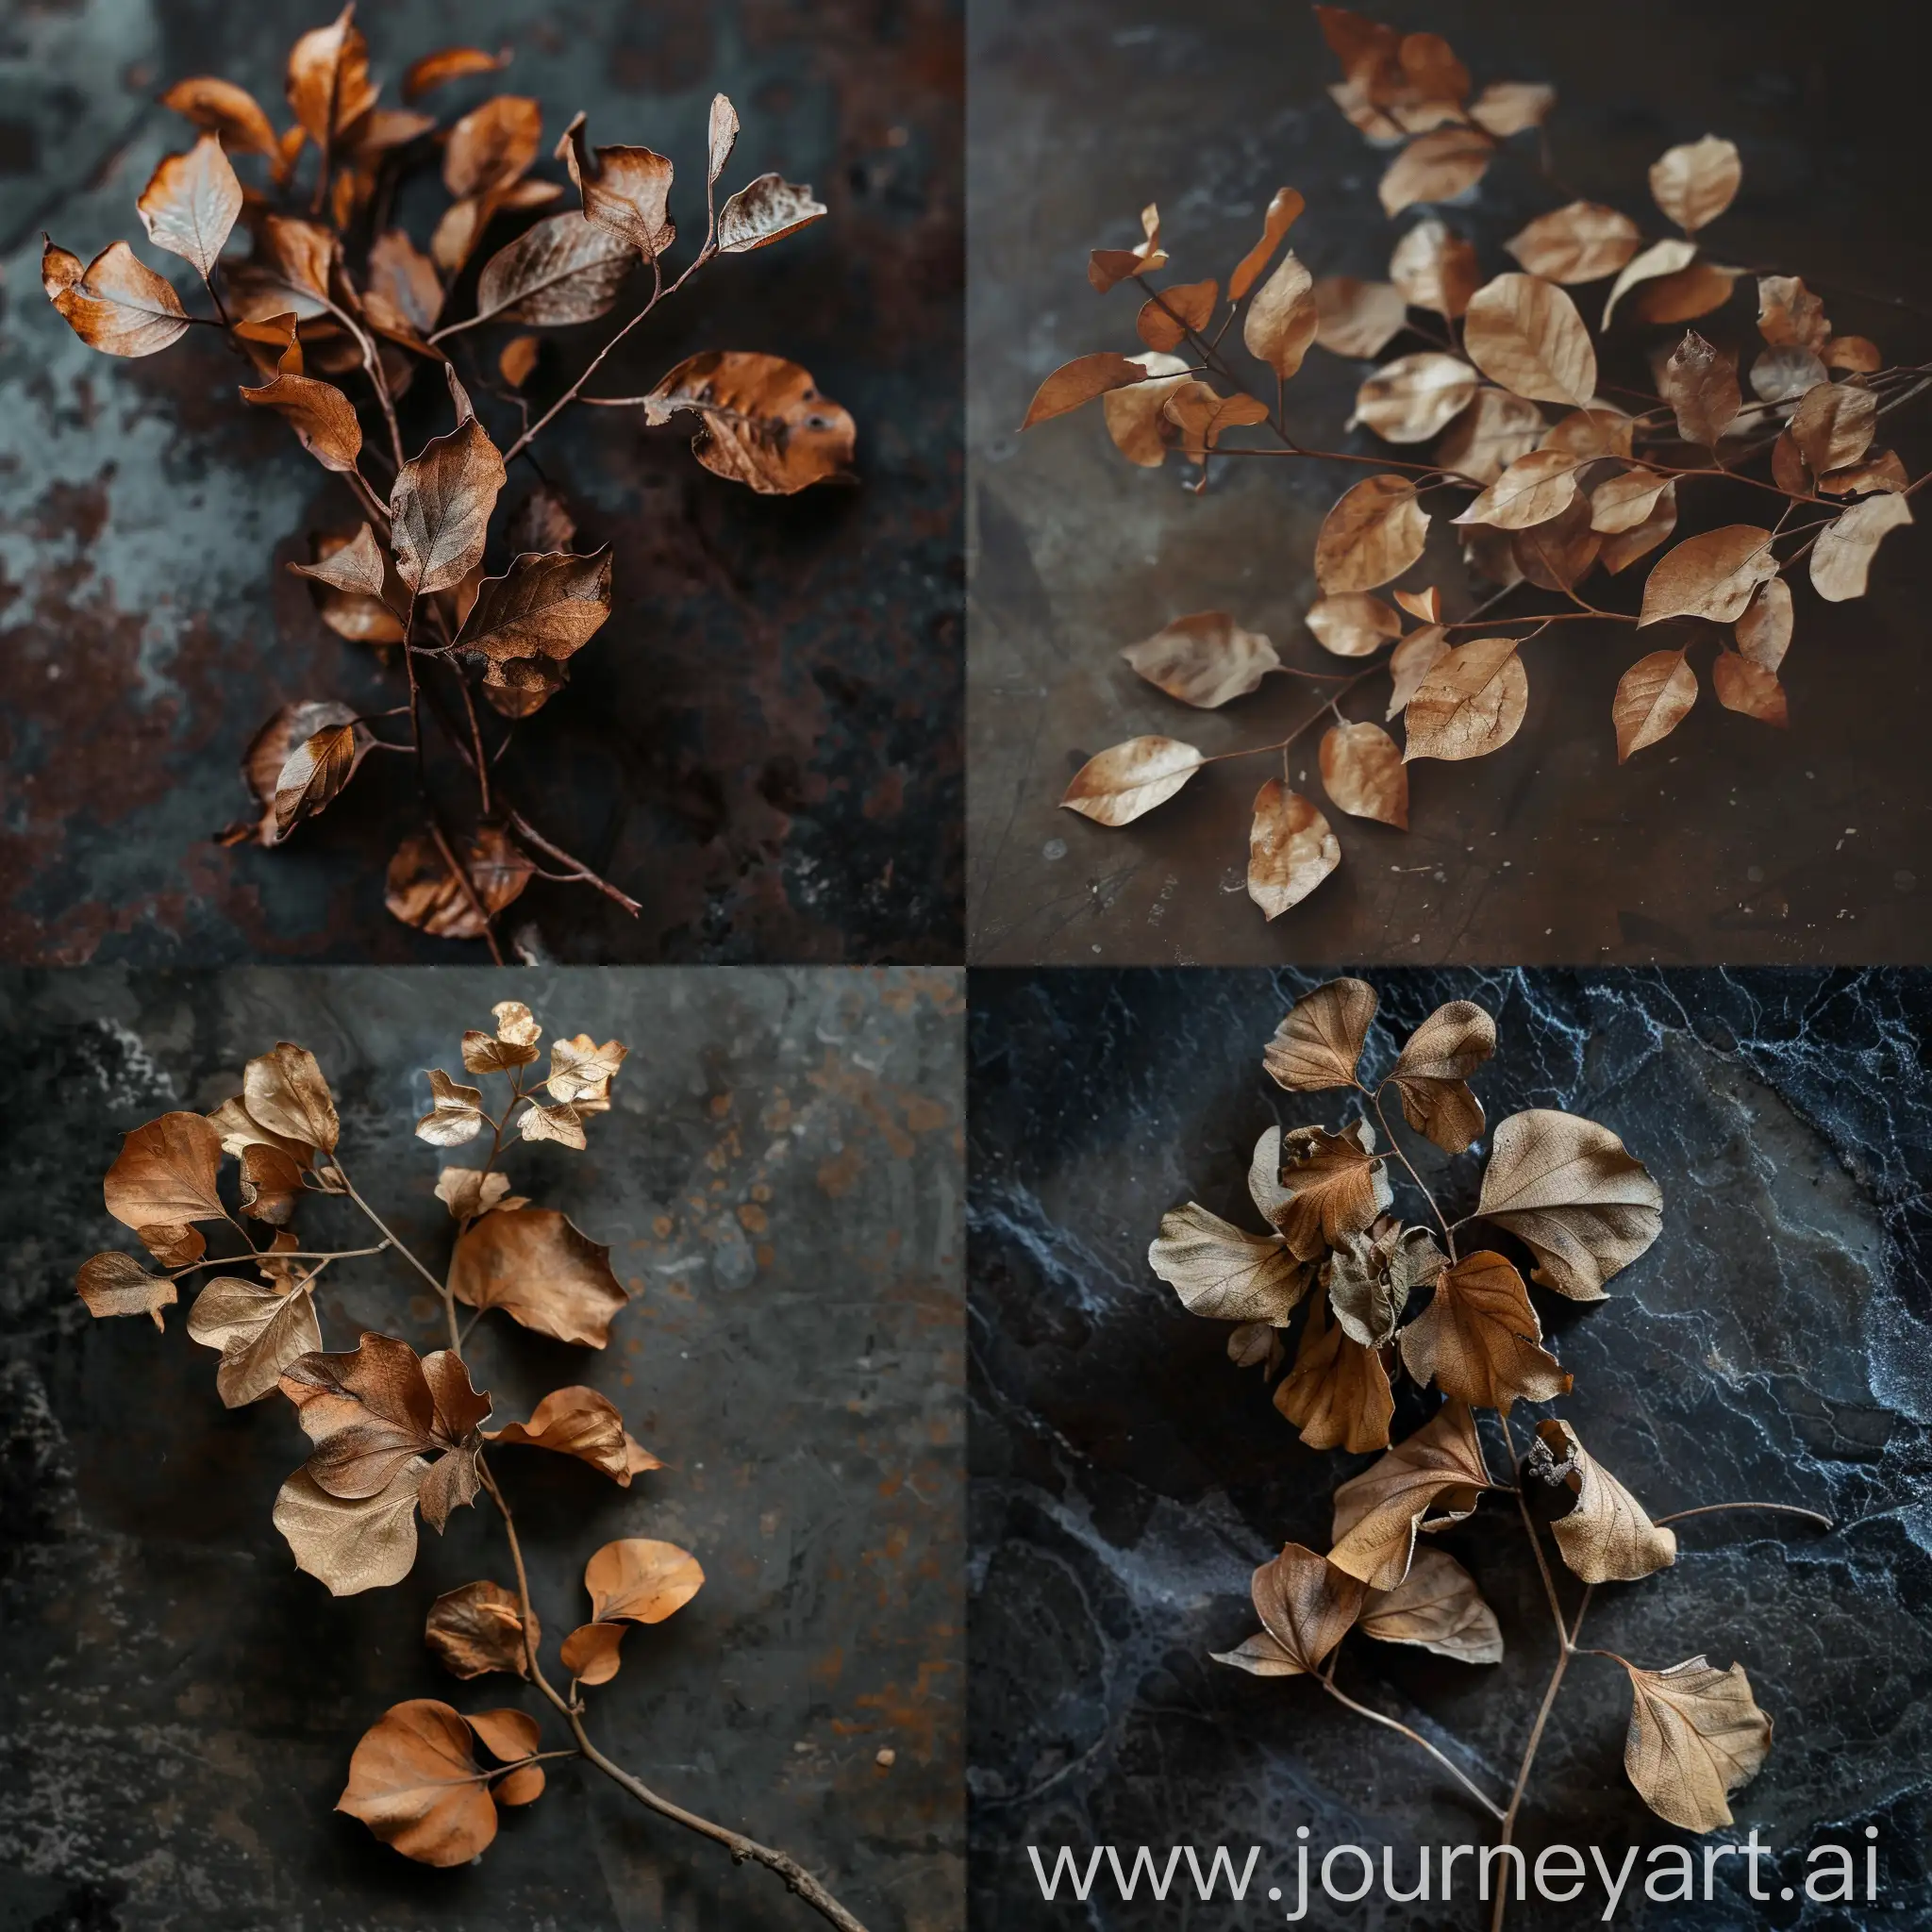 A dried plant with brown leaves, placed on a dark surface.